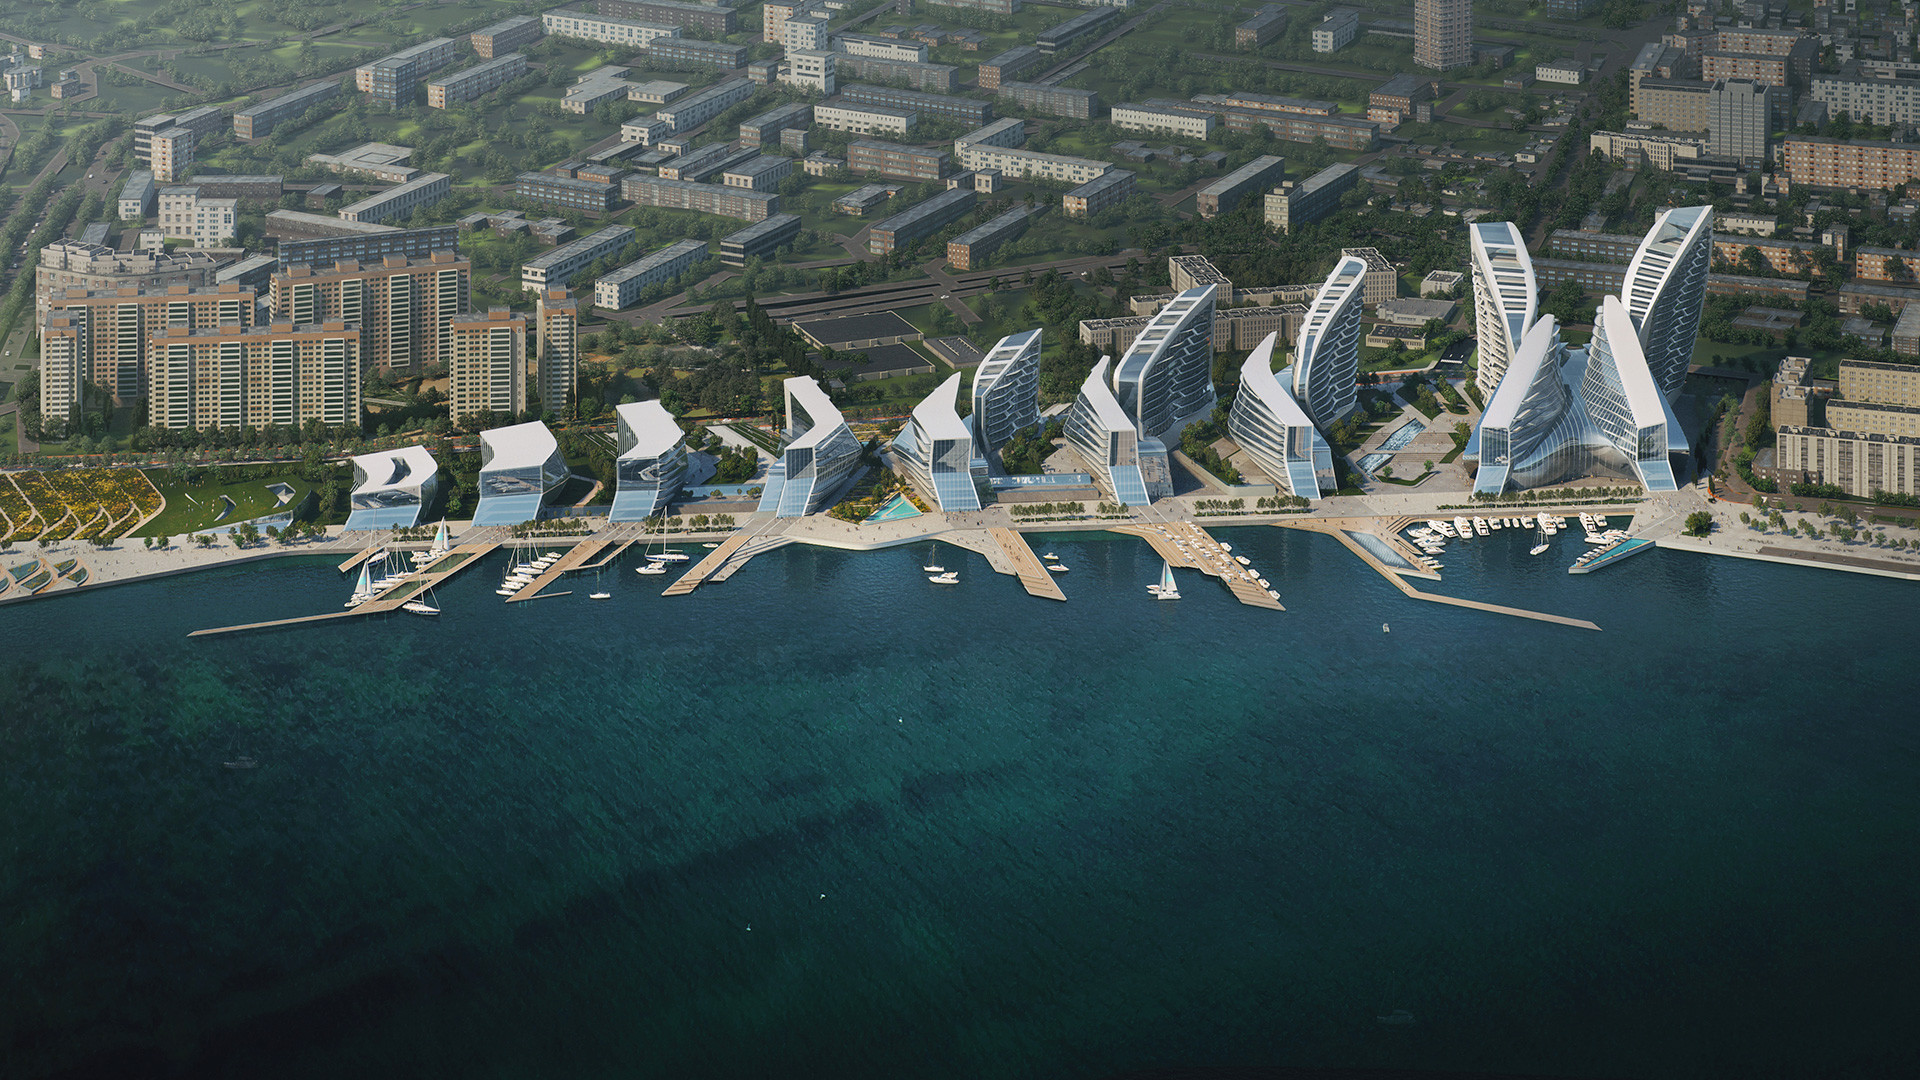 For Now, These Beautiful Buildings In Novorossiysk - Zaha Hadid Master Plan - HD Wallpaper 